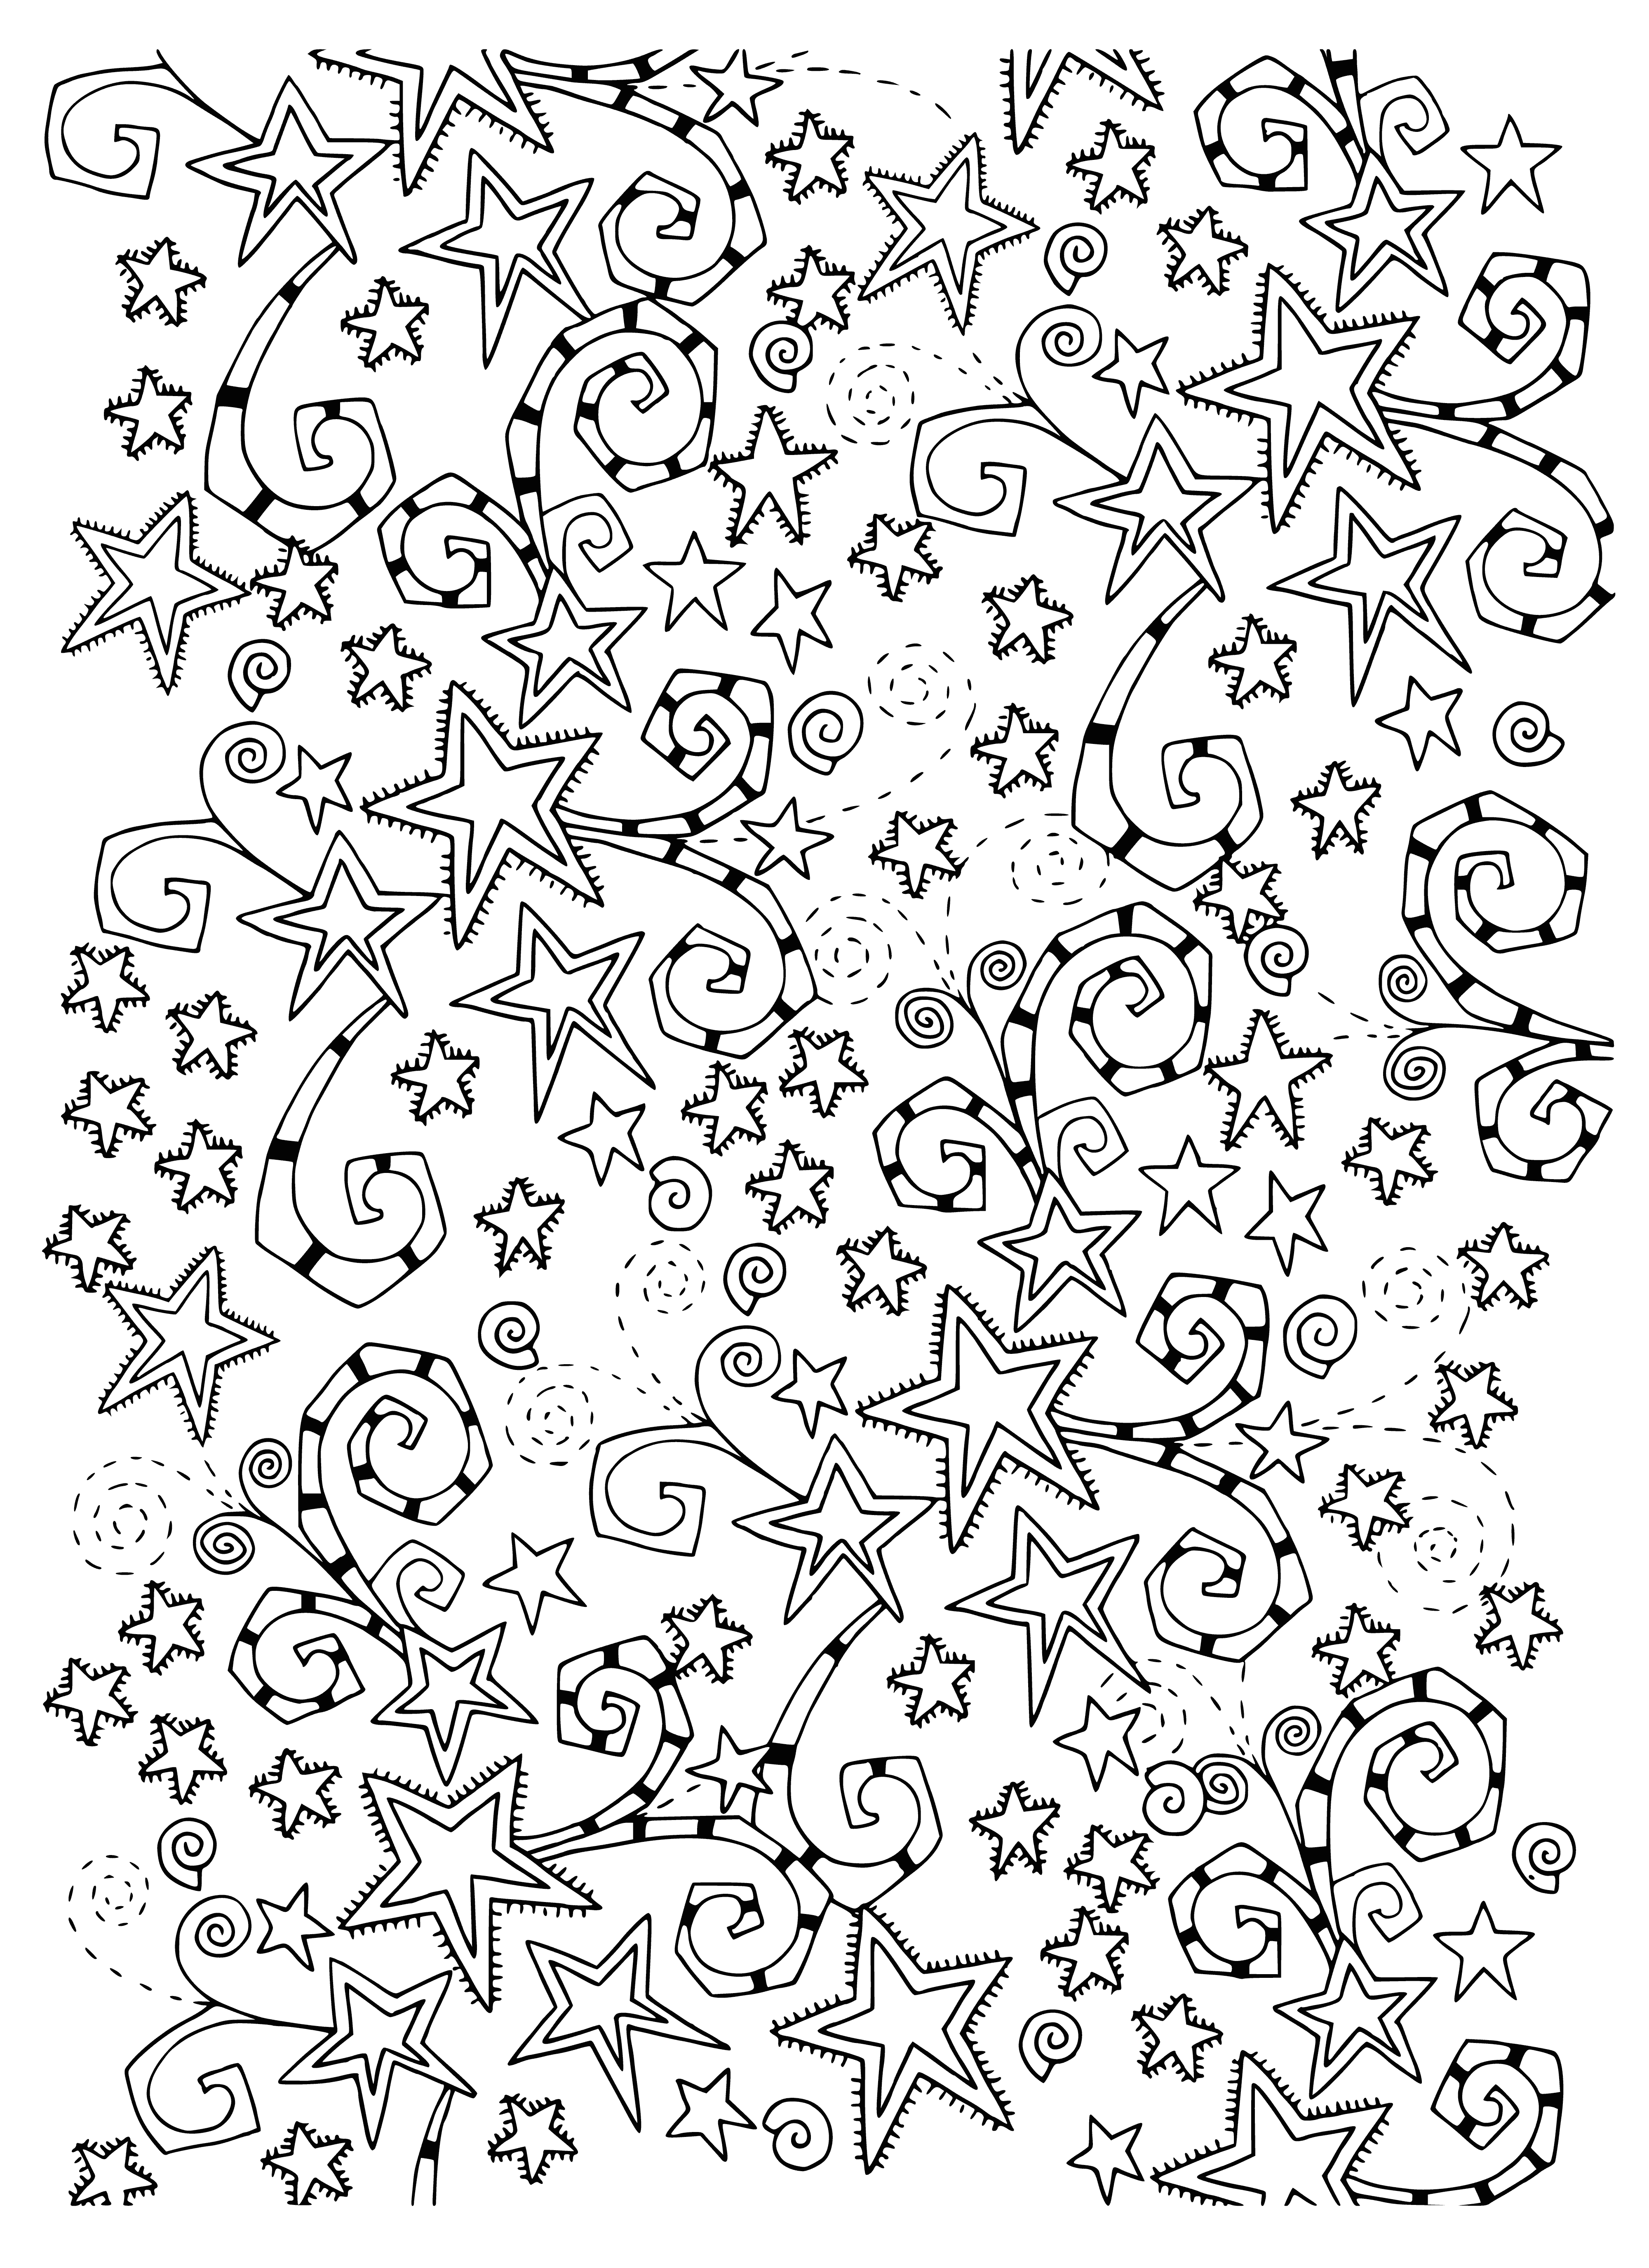 coloring page: Stars in space: different colors and sizes, plus lines and shapes in the background. #space #coloringpage